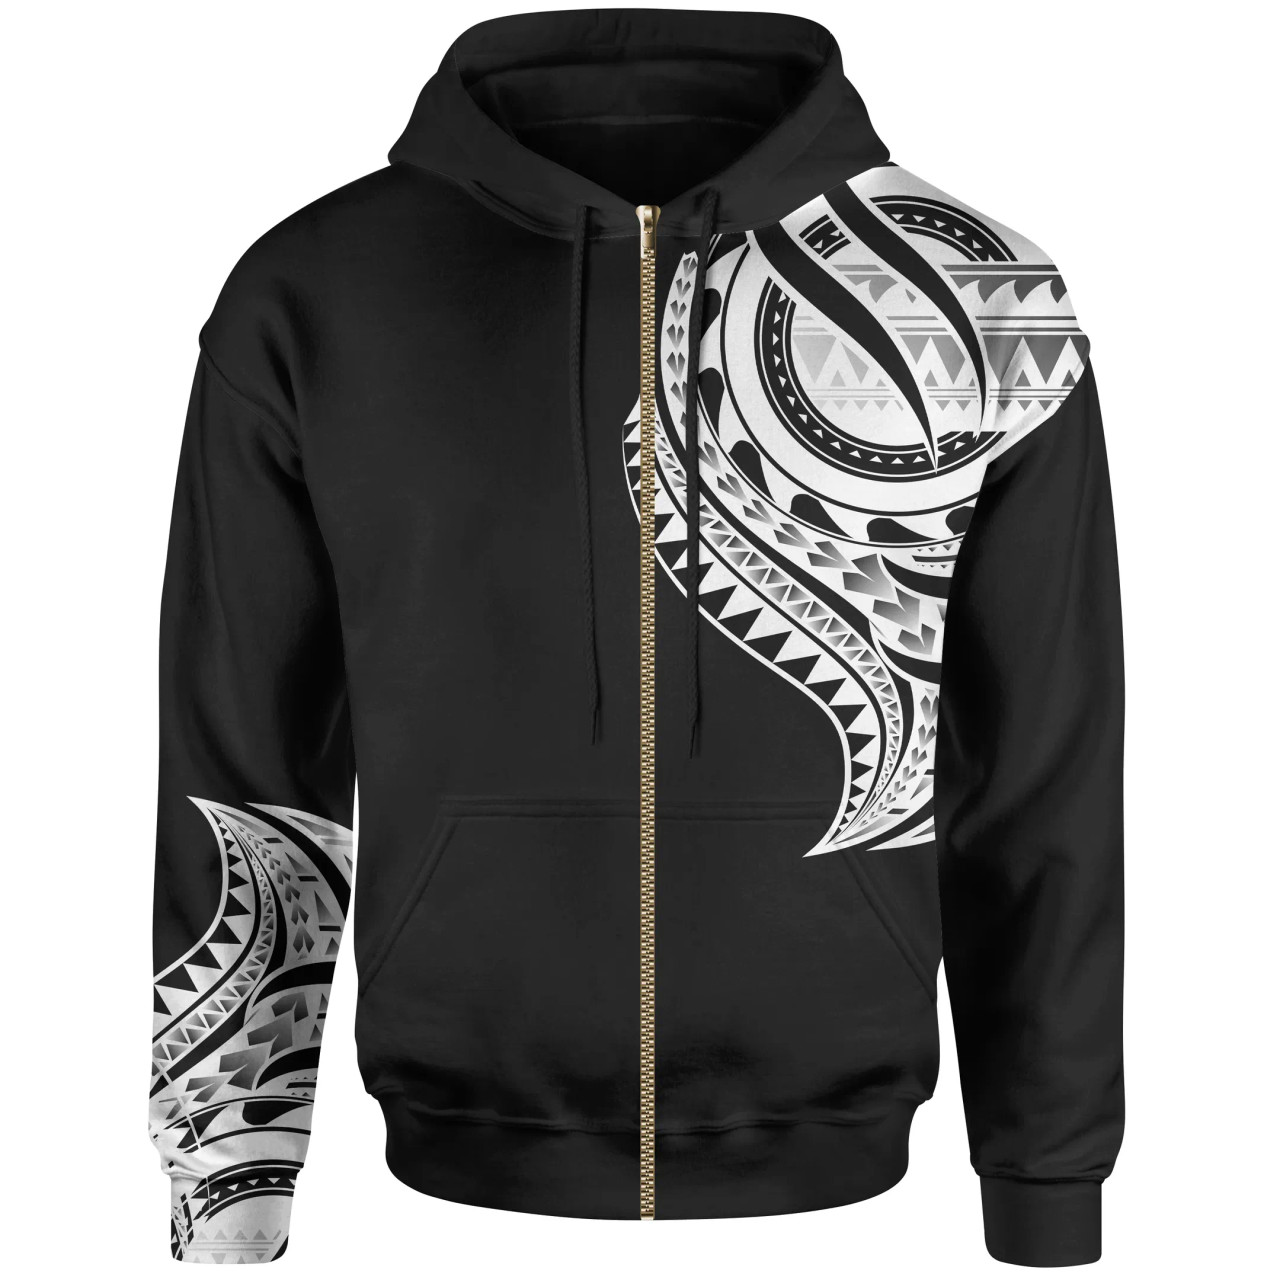 Yap State Hoodie - Yap State Tatau White Patterns With Coat Of'rms